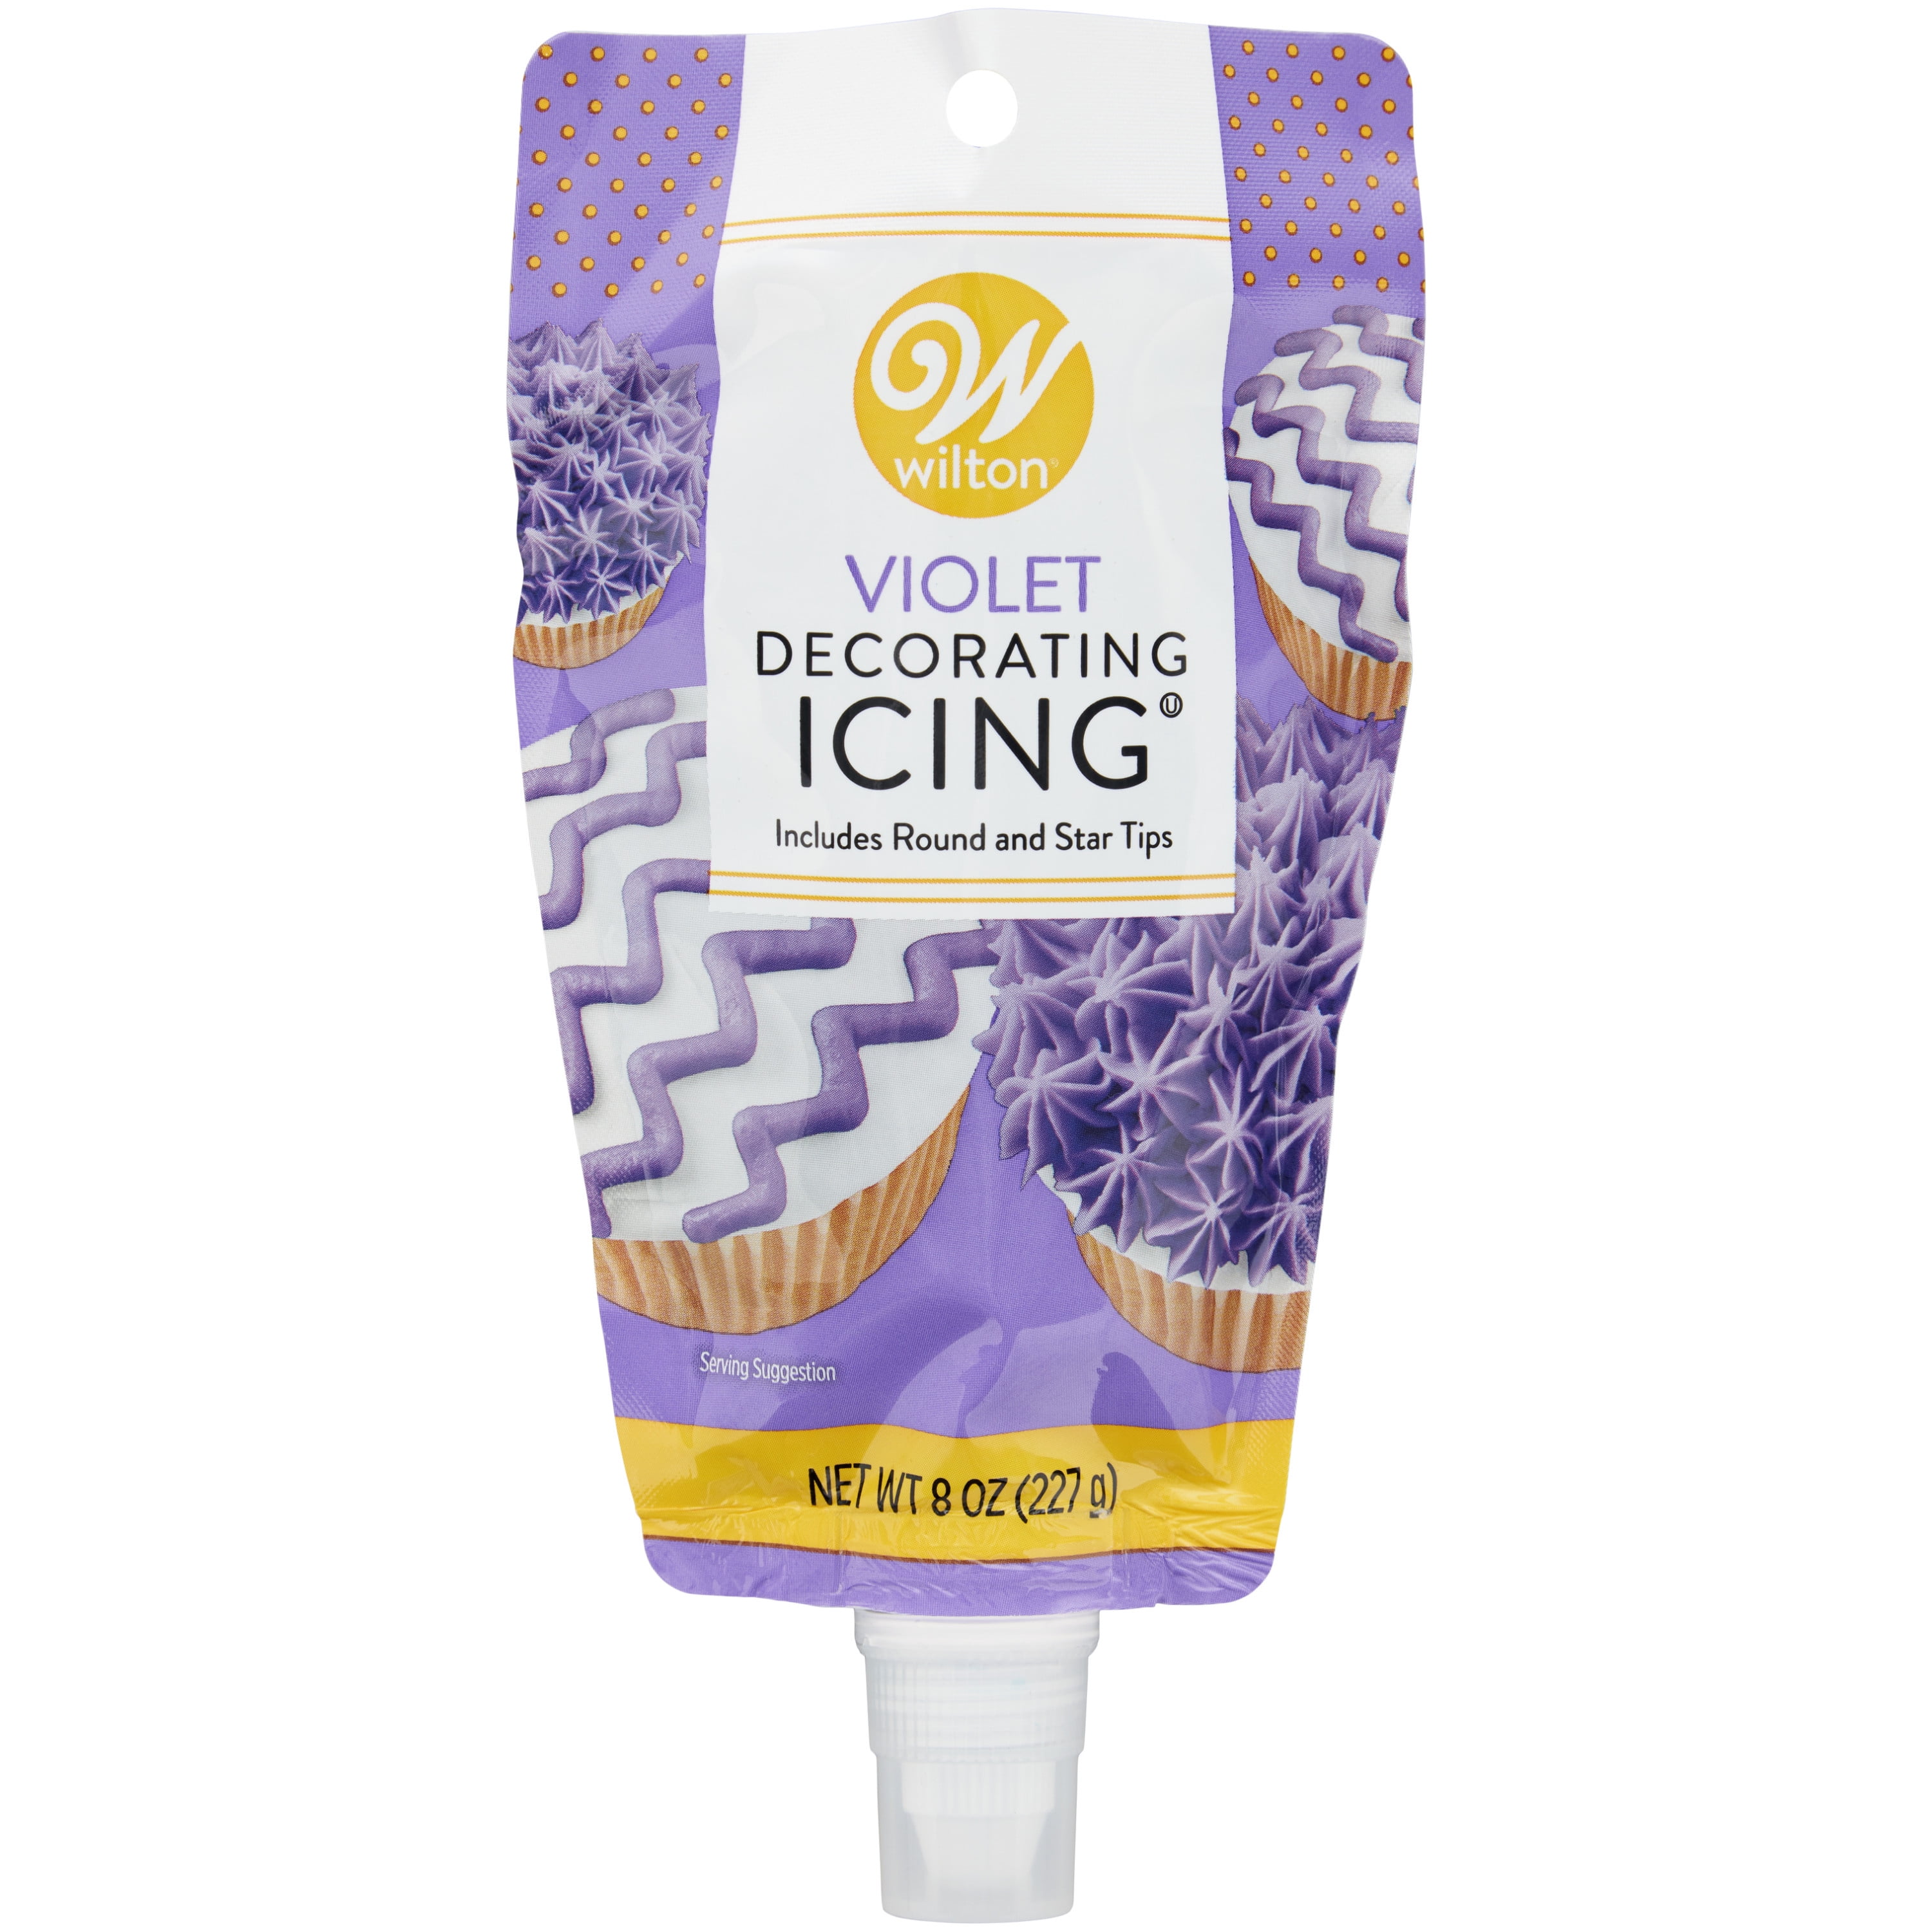 Wilton Purple Buttercream Icing Pouch with Star and Round Tips, 8 oz.